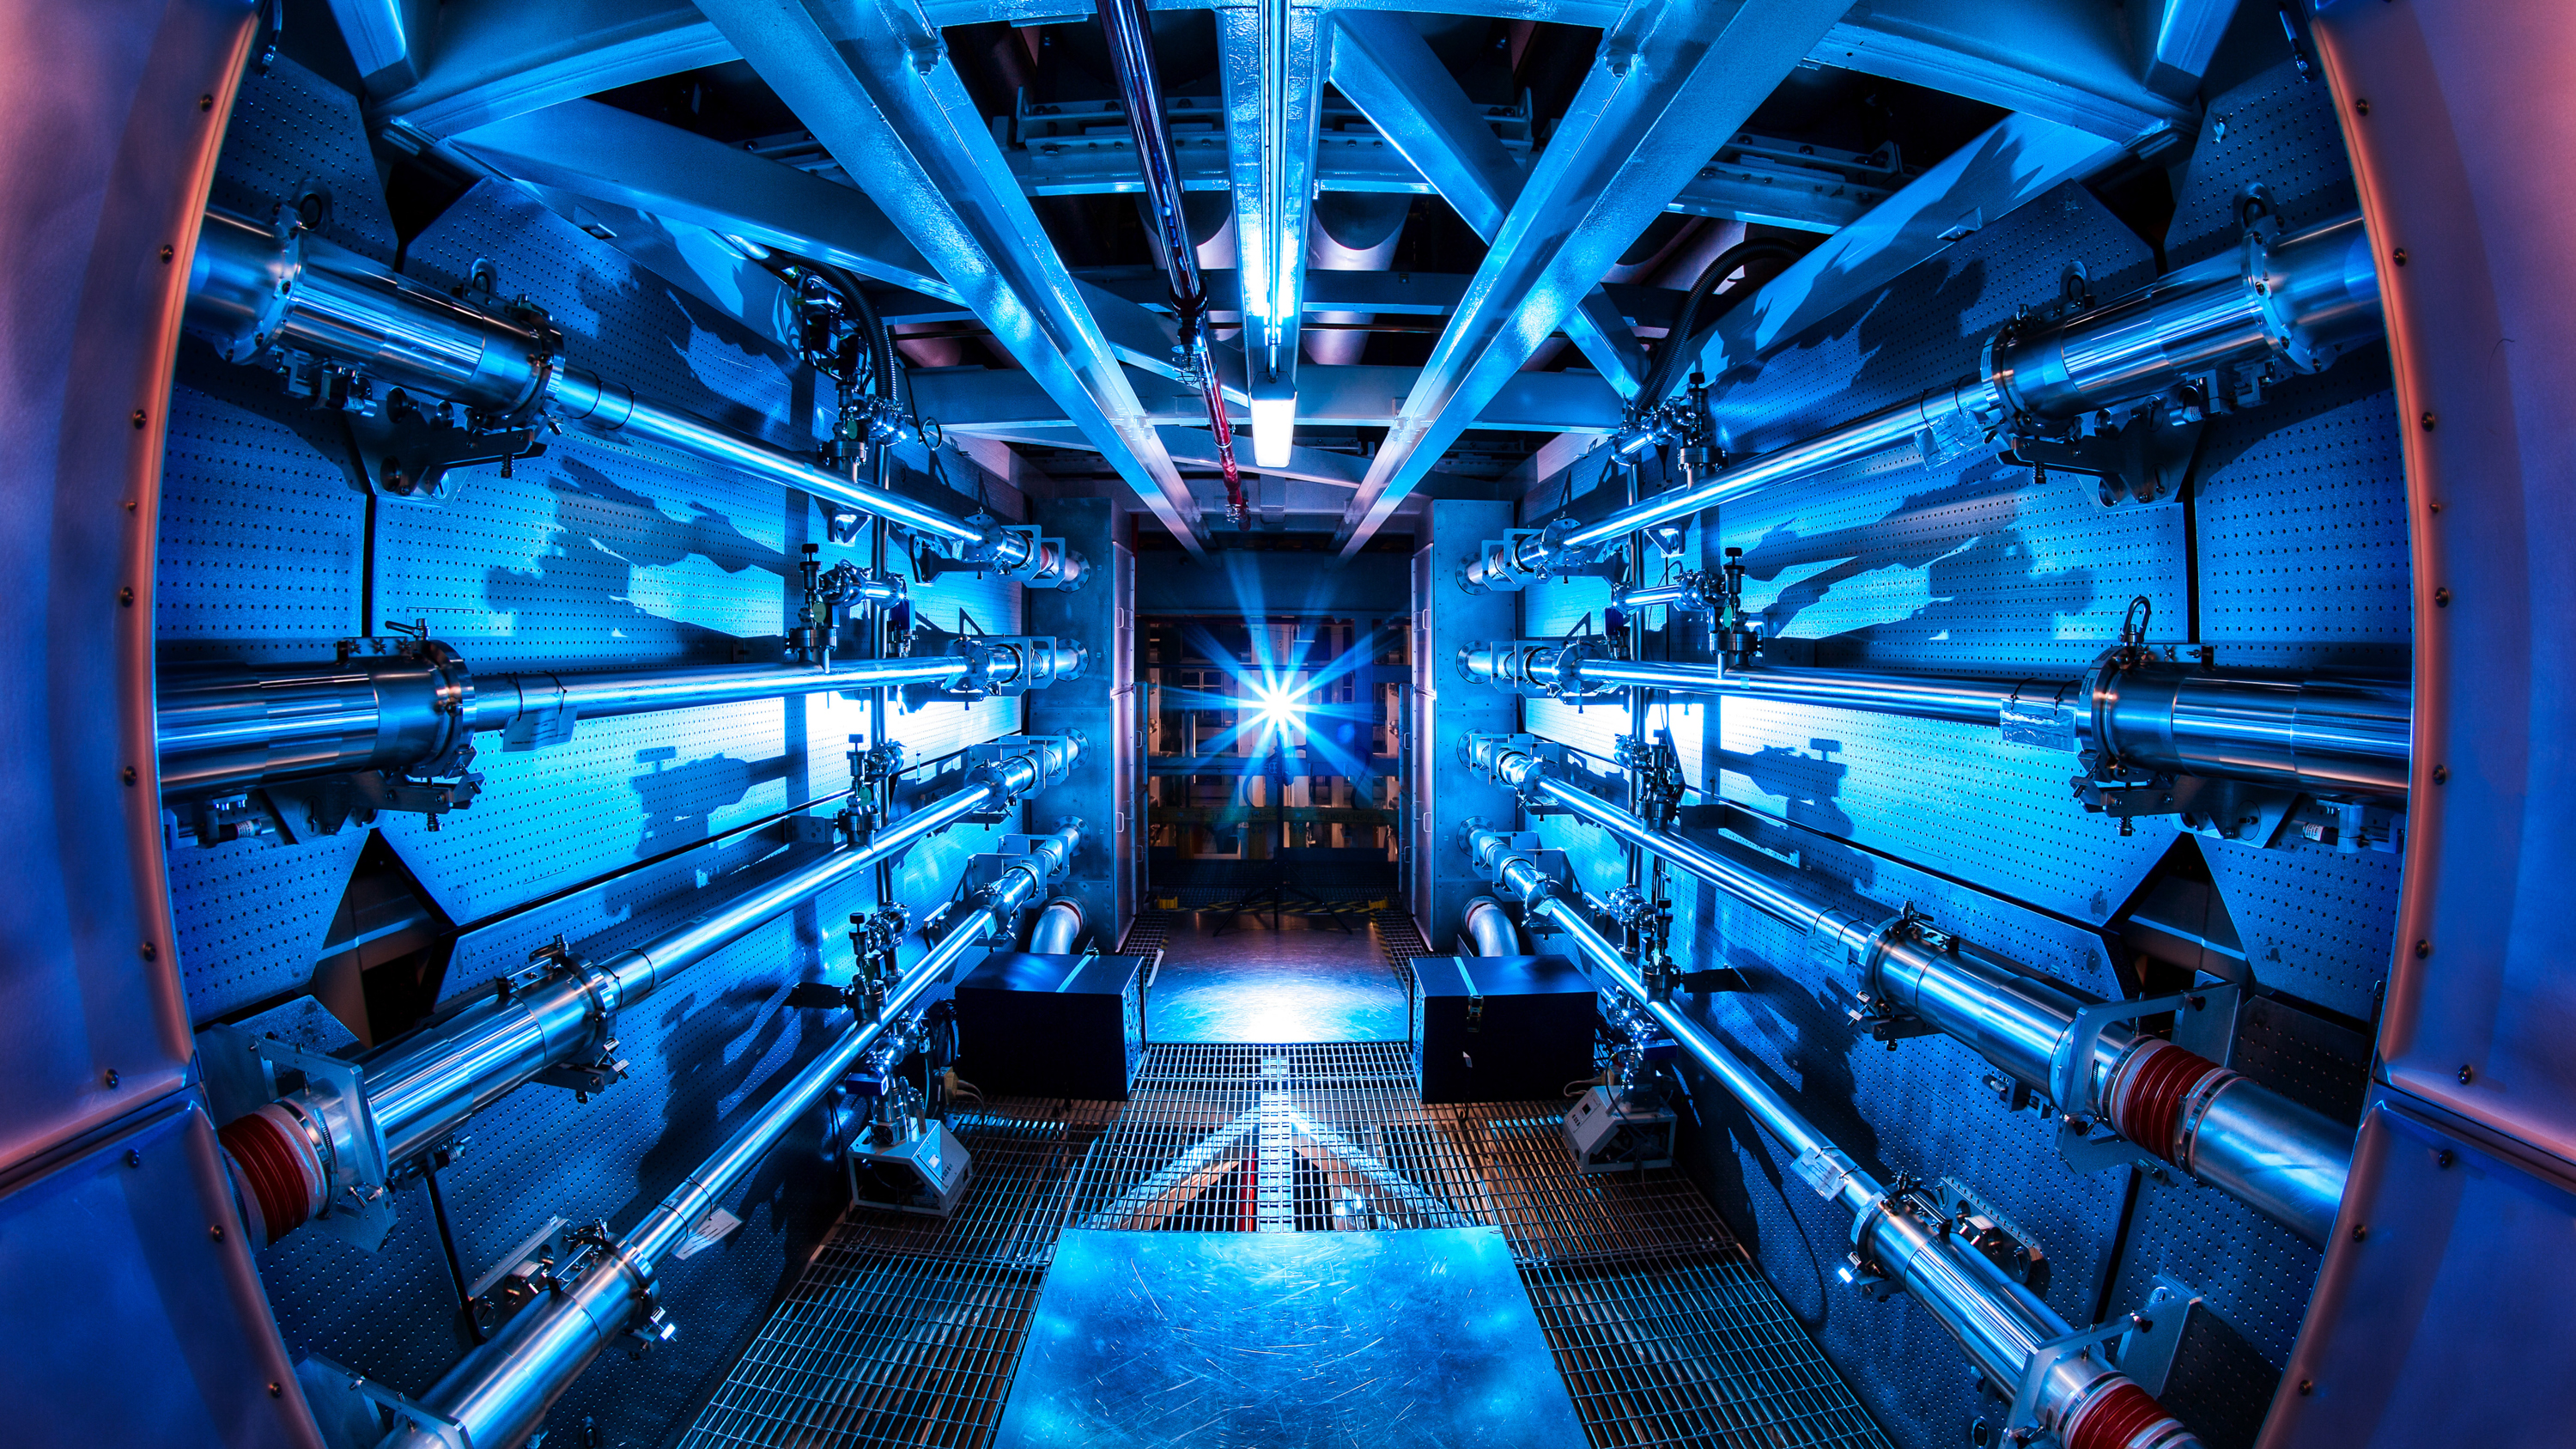 futuristic image of a nuclear fusion reactor, with a starburst light in the center of the image